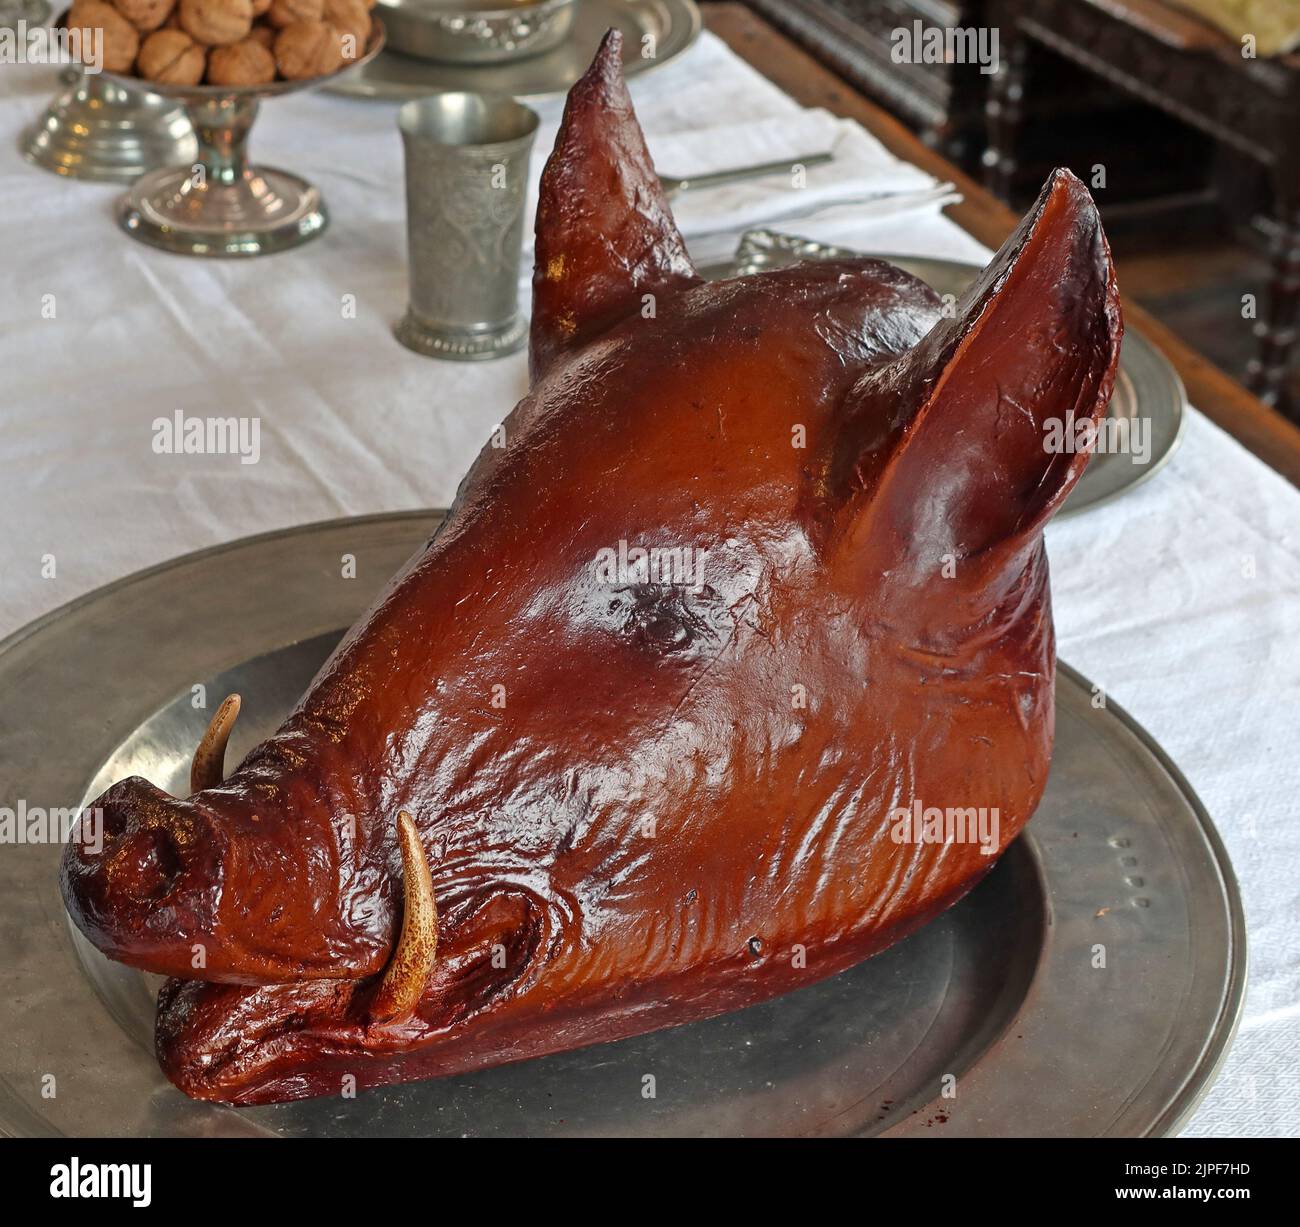 A cooked roasted pigs head, on a pewter plate Stock Photo